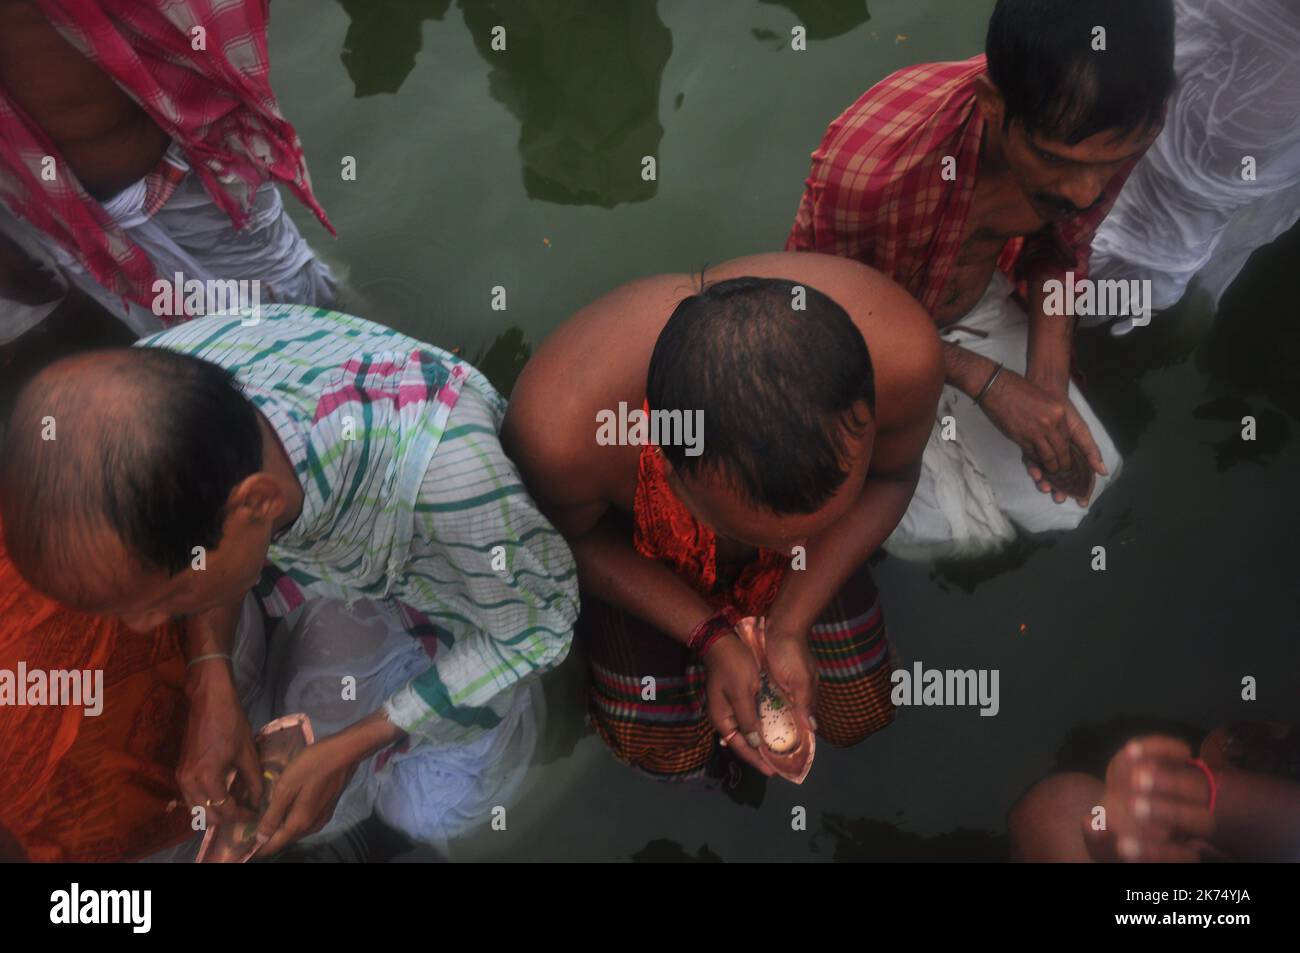 Indian Hindu devotees perform Tarpan, also known as Pitritarpan in Tripura. Tarpan is a ritual to pay obeisance to one's forfathers, and on its last day on September 19, 2017, they prayed their ancestors. In Hindu mythology, this day is also called -Mahalaya- and described as the day when the Gods created the ten armed Godess Durga to destroy the demon king Asur who plotted to drive out the gods from their kingdom. During this five-day period, they worship of Durga, who is recognized as the destroyer of evil. Stock Photo